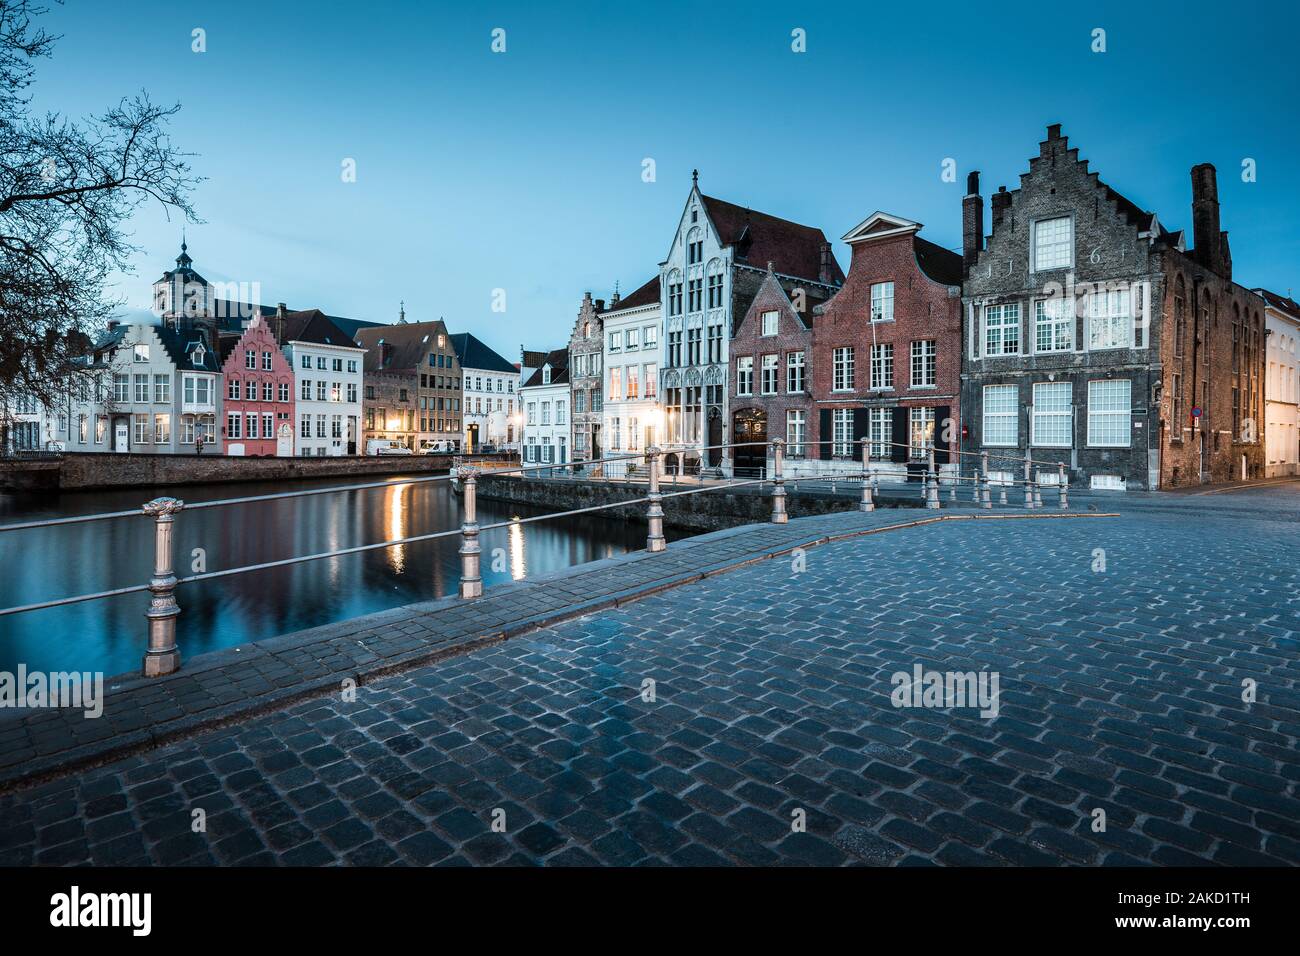 Classic panoramic twilight view of the historic city center of Brugge during beautiful evening blue hour at dusk, province of West Flanders, Belgium Stock Photo